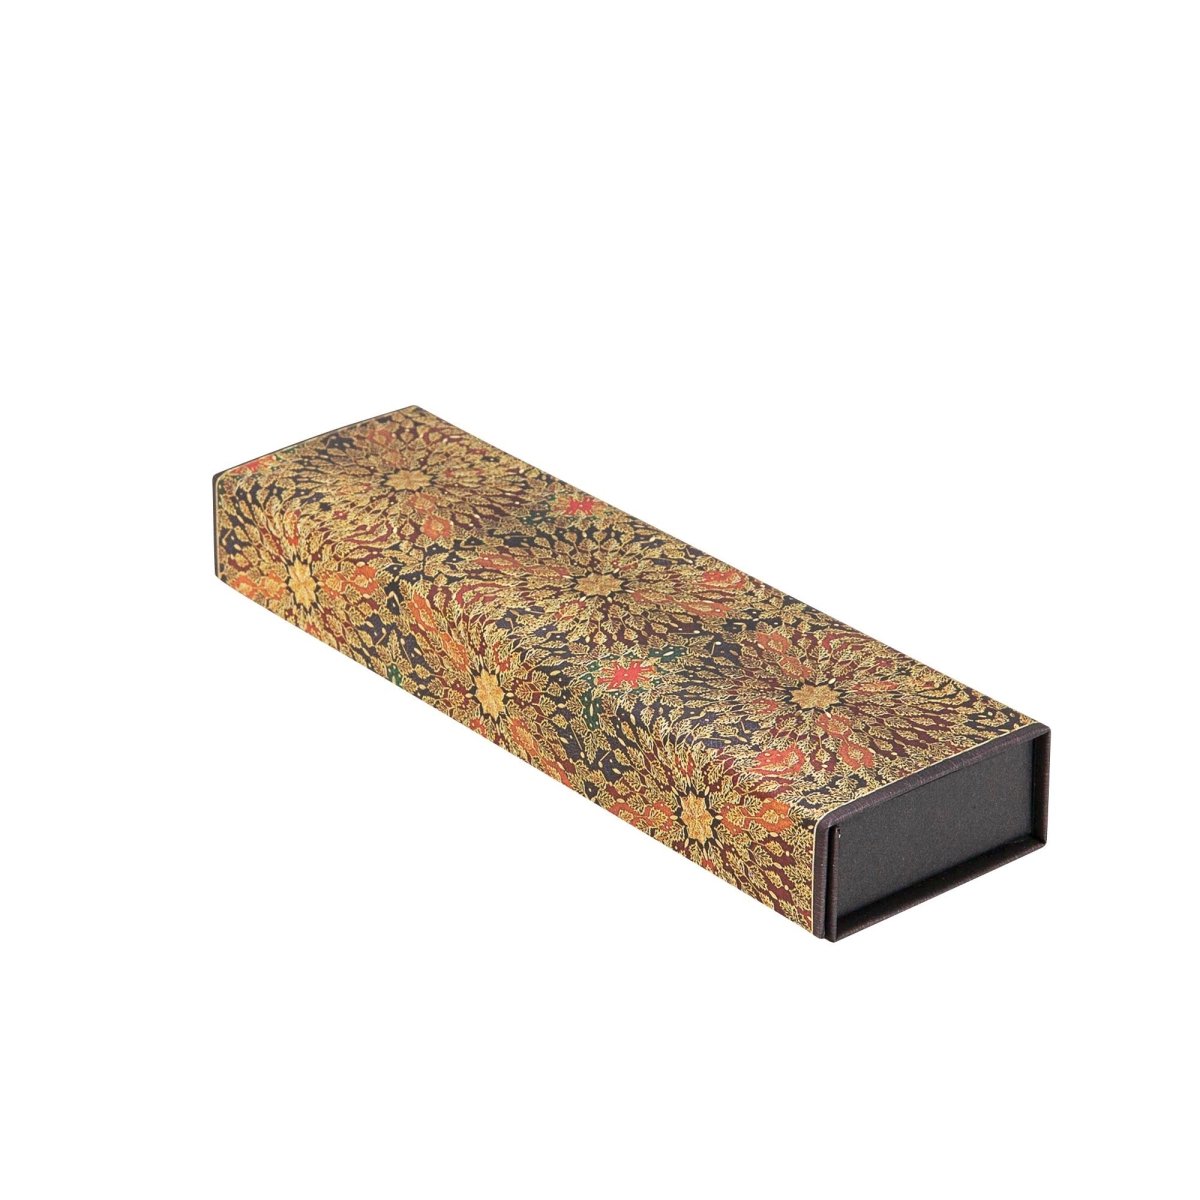 Paperblanks - Fire Flowers - Fire Flowers Pencil Case - merriartist.com